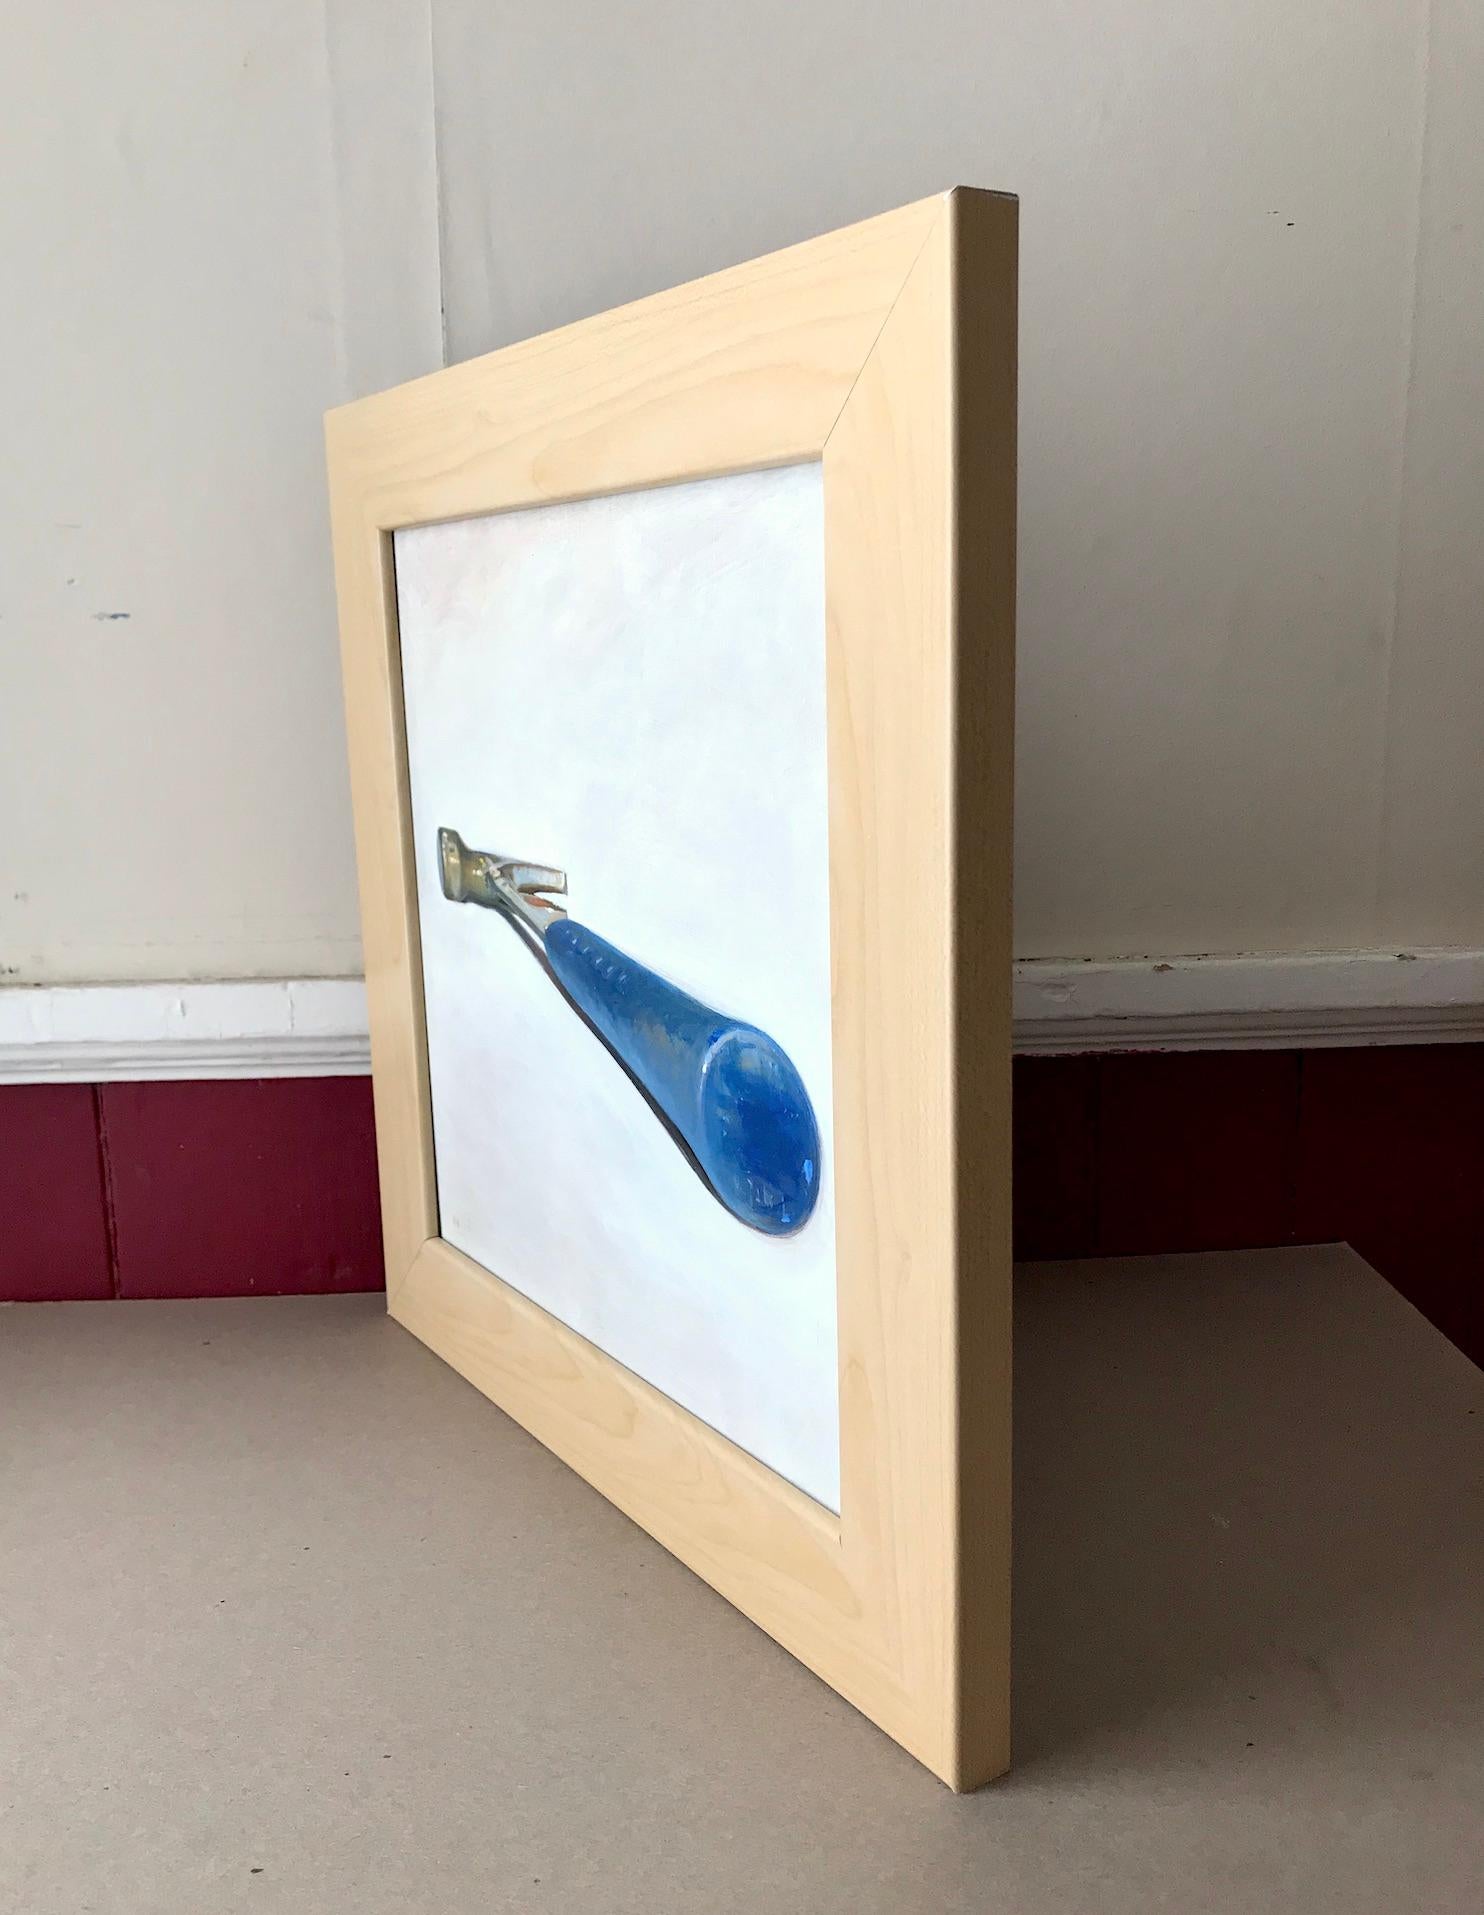 Small, square still life oil painting of a blue hammer against a cream colored backdrop
oil on panel, framed in a light wood frame
12 x 12 inches, 15 x 15 inches framed

As part of his 